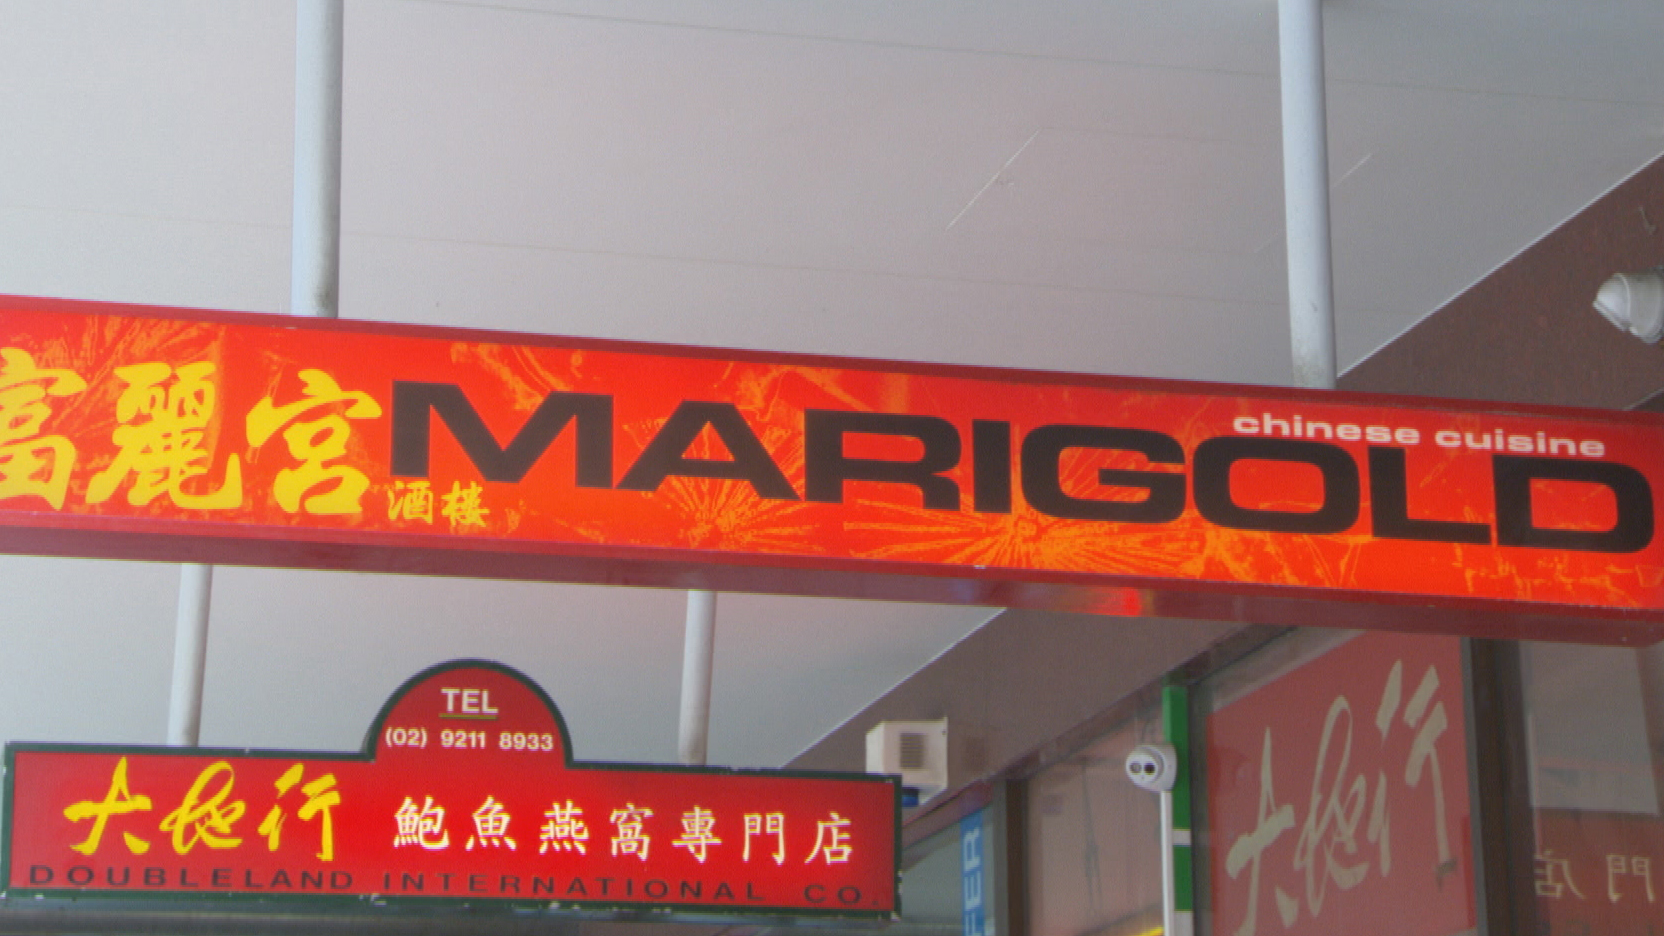 Sydney has lost a dining institution, with Marigold in Chinatown serving its final yum cha.